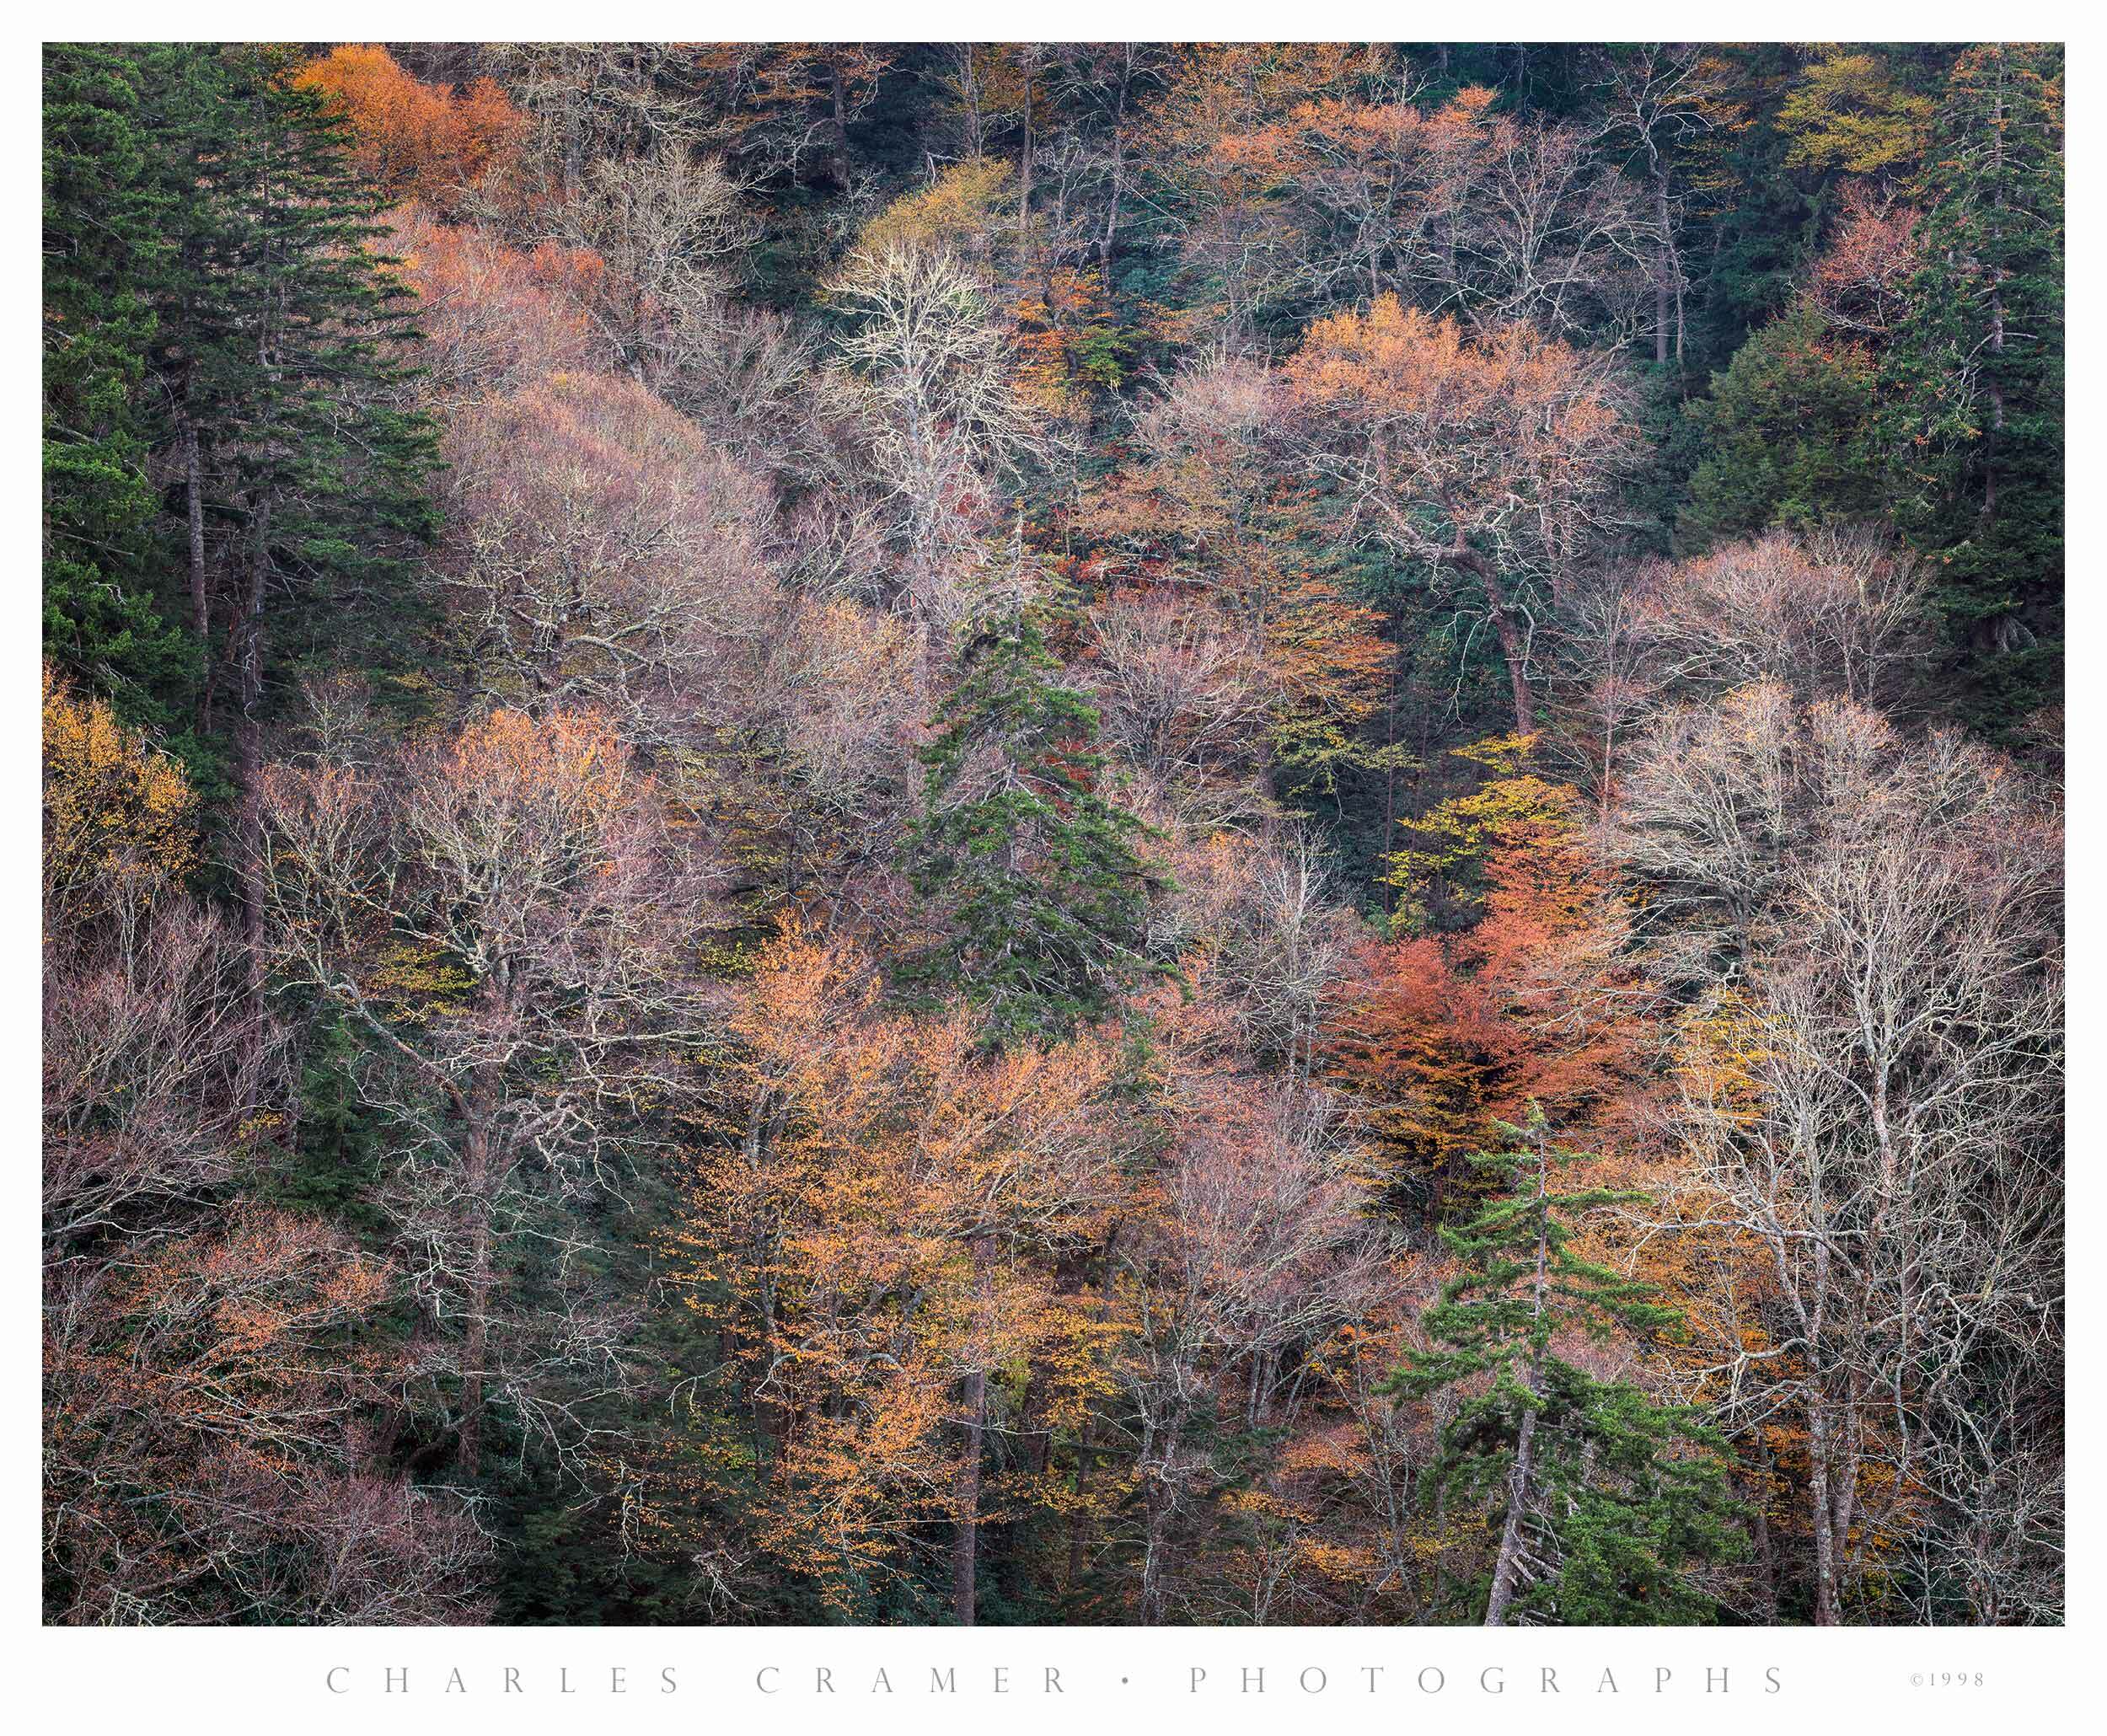 Late Fall, Bare Trees, Great Smoky Mountains